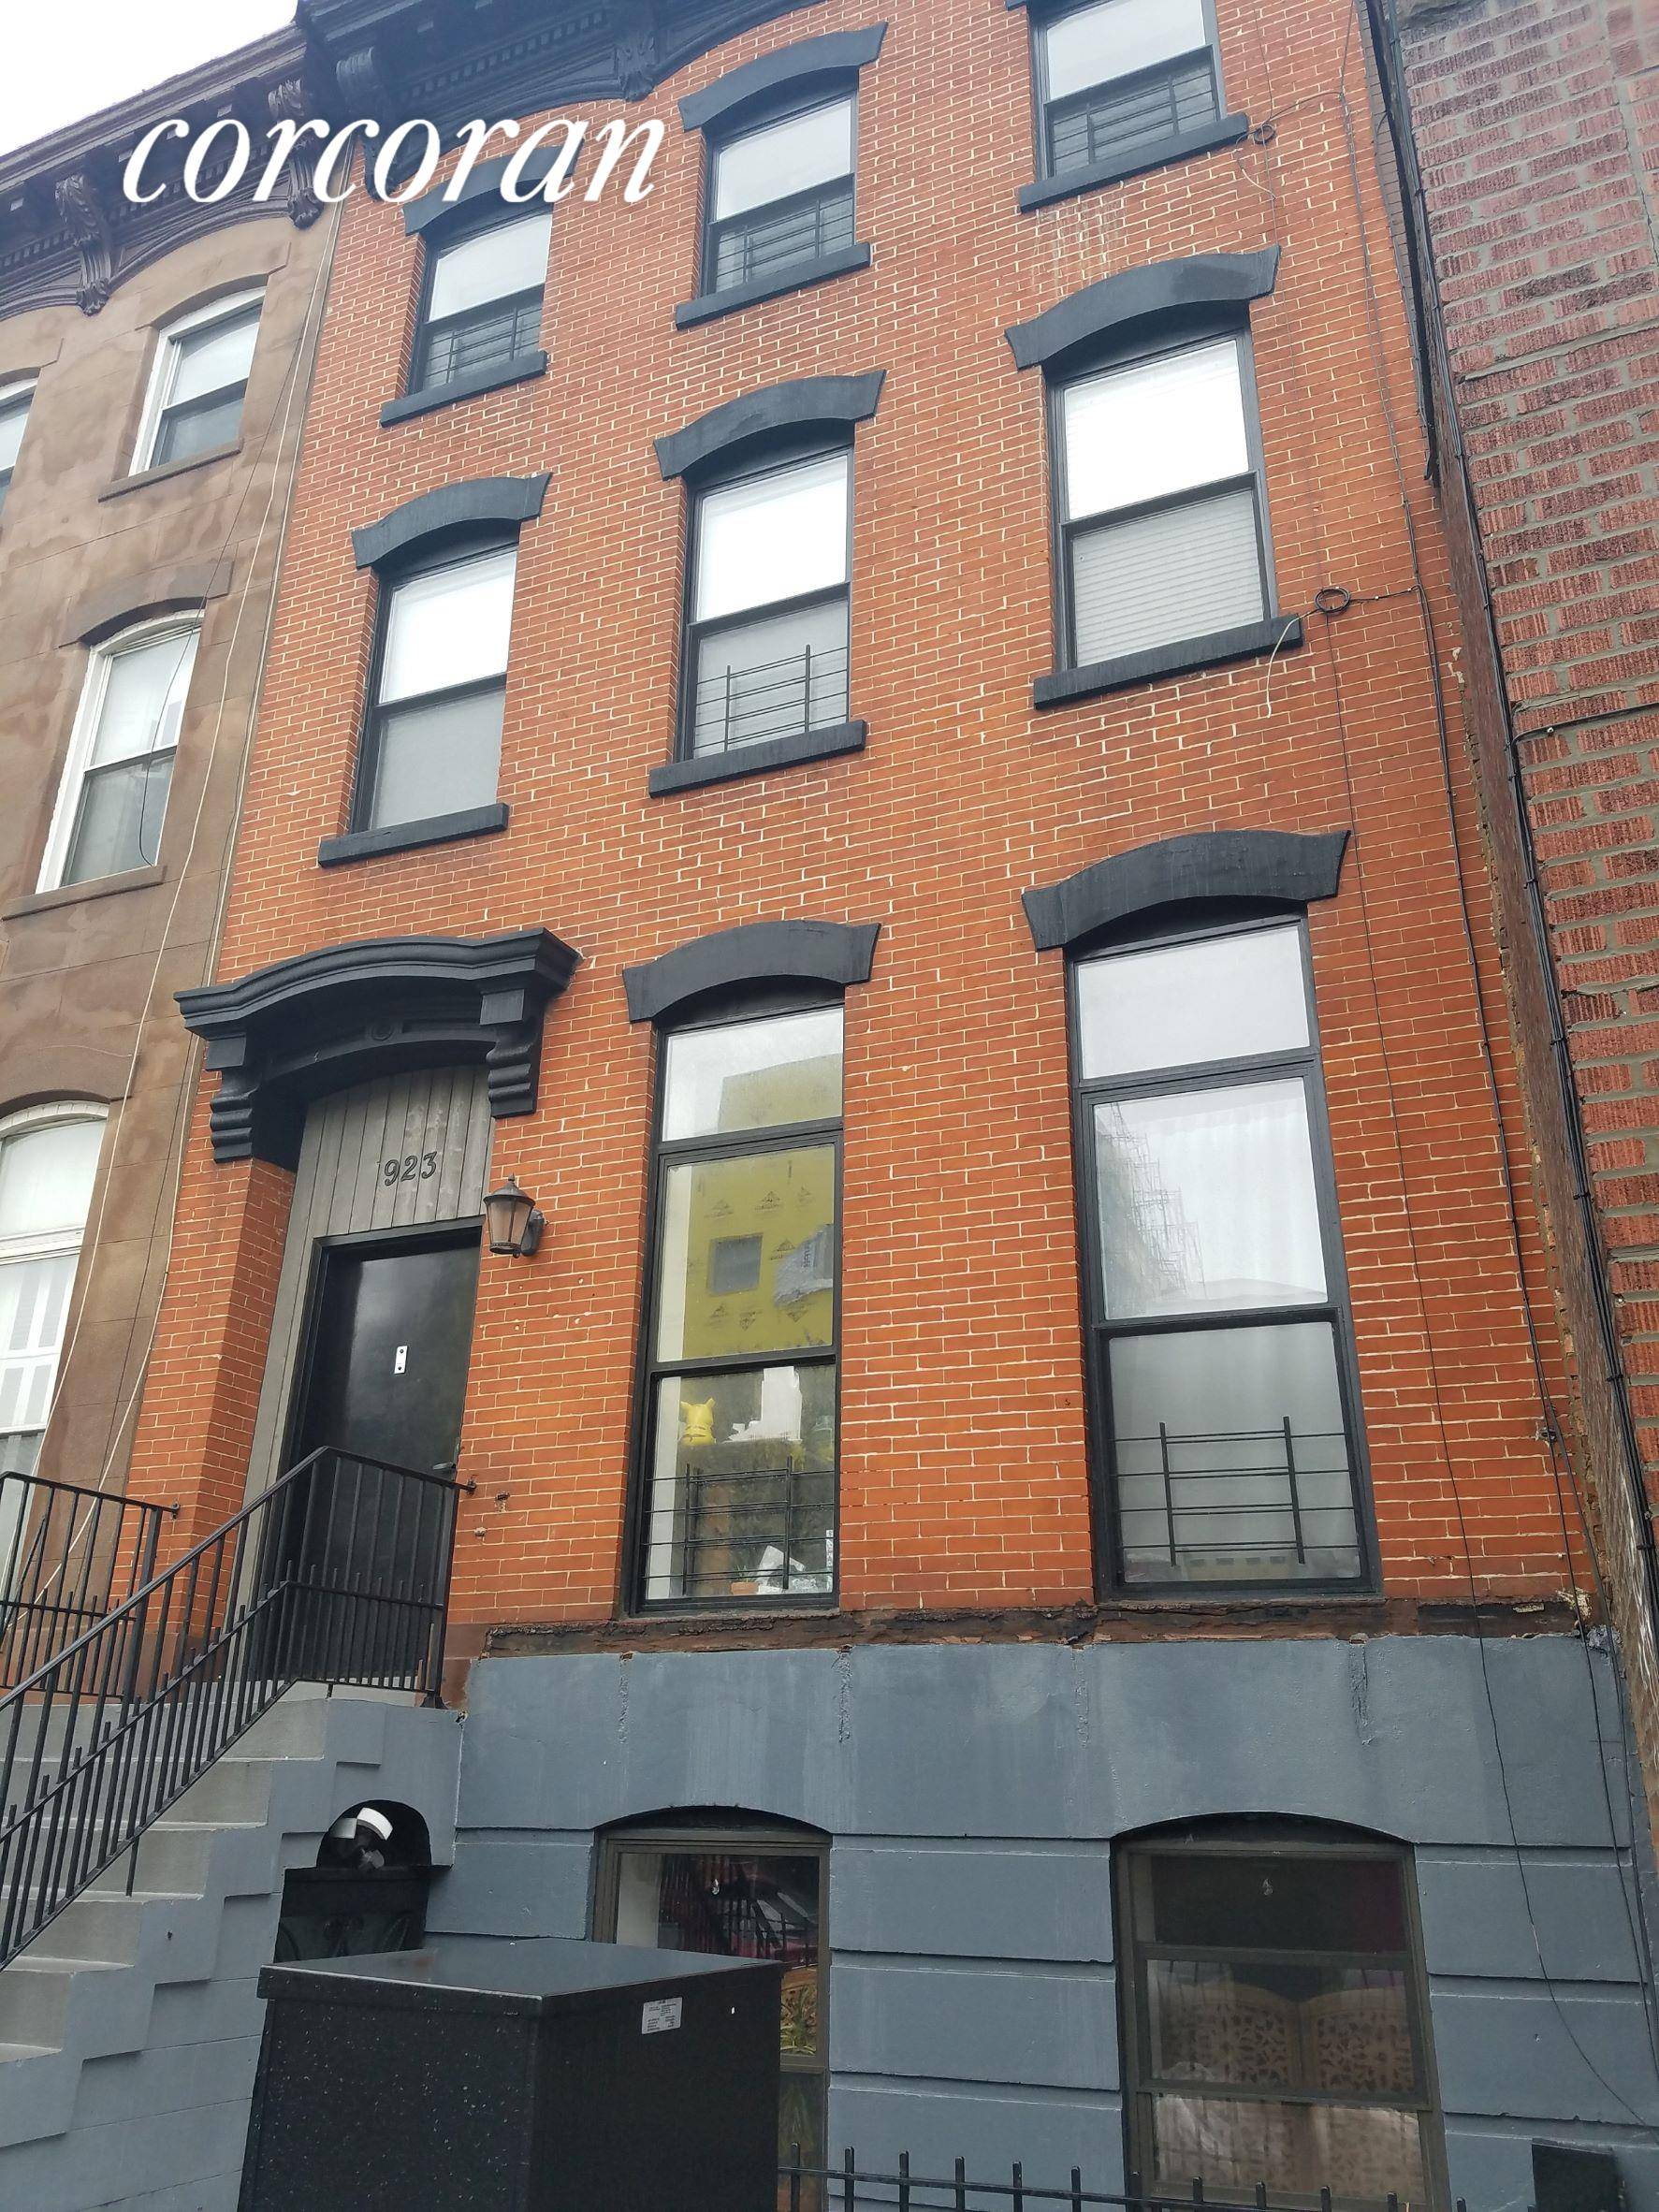 Bedford Stuyvesant all brick Townhouse Investment Property with 8 Free Market units yielding a 5.